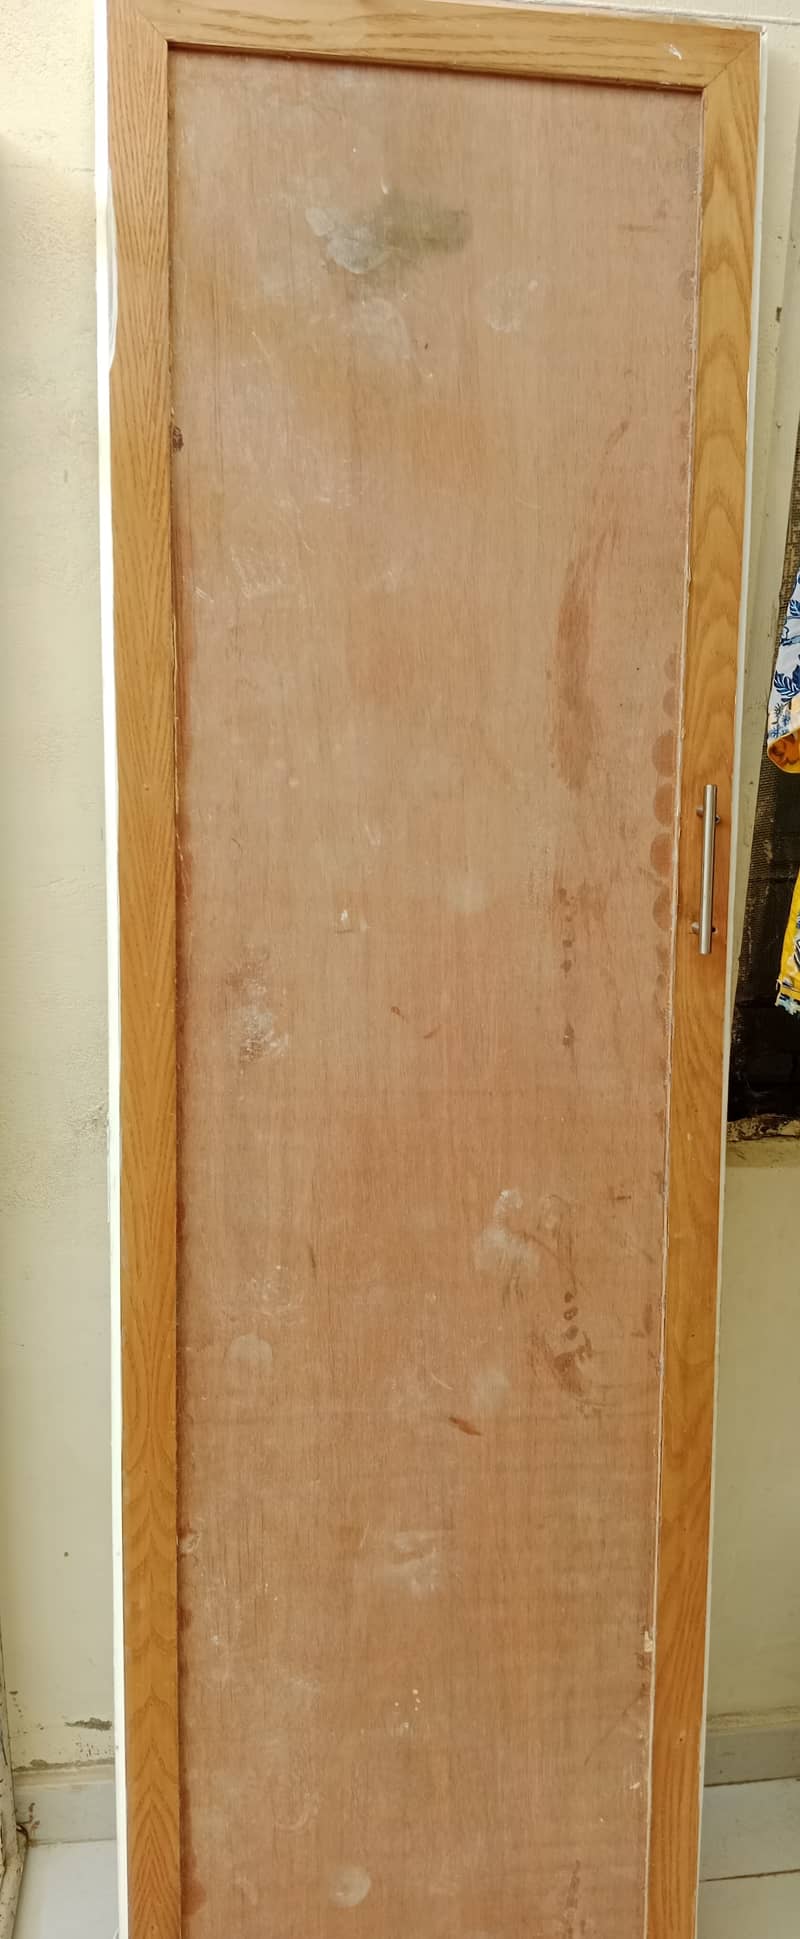 Door for sale neat and clean only WhatsUp 03060103003 12